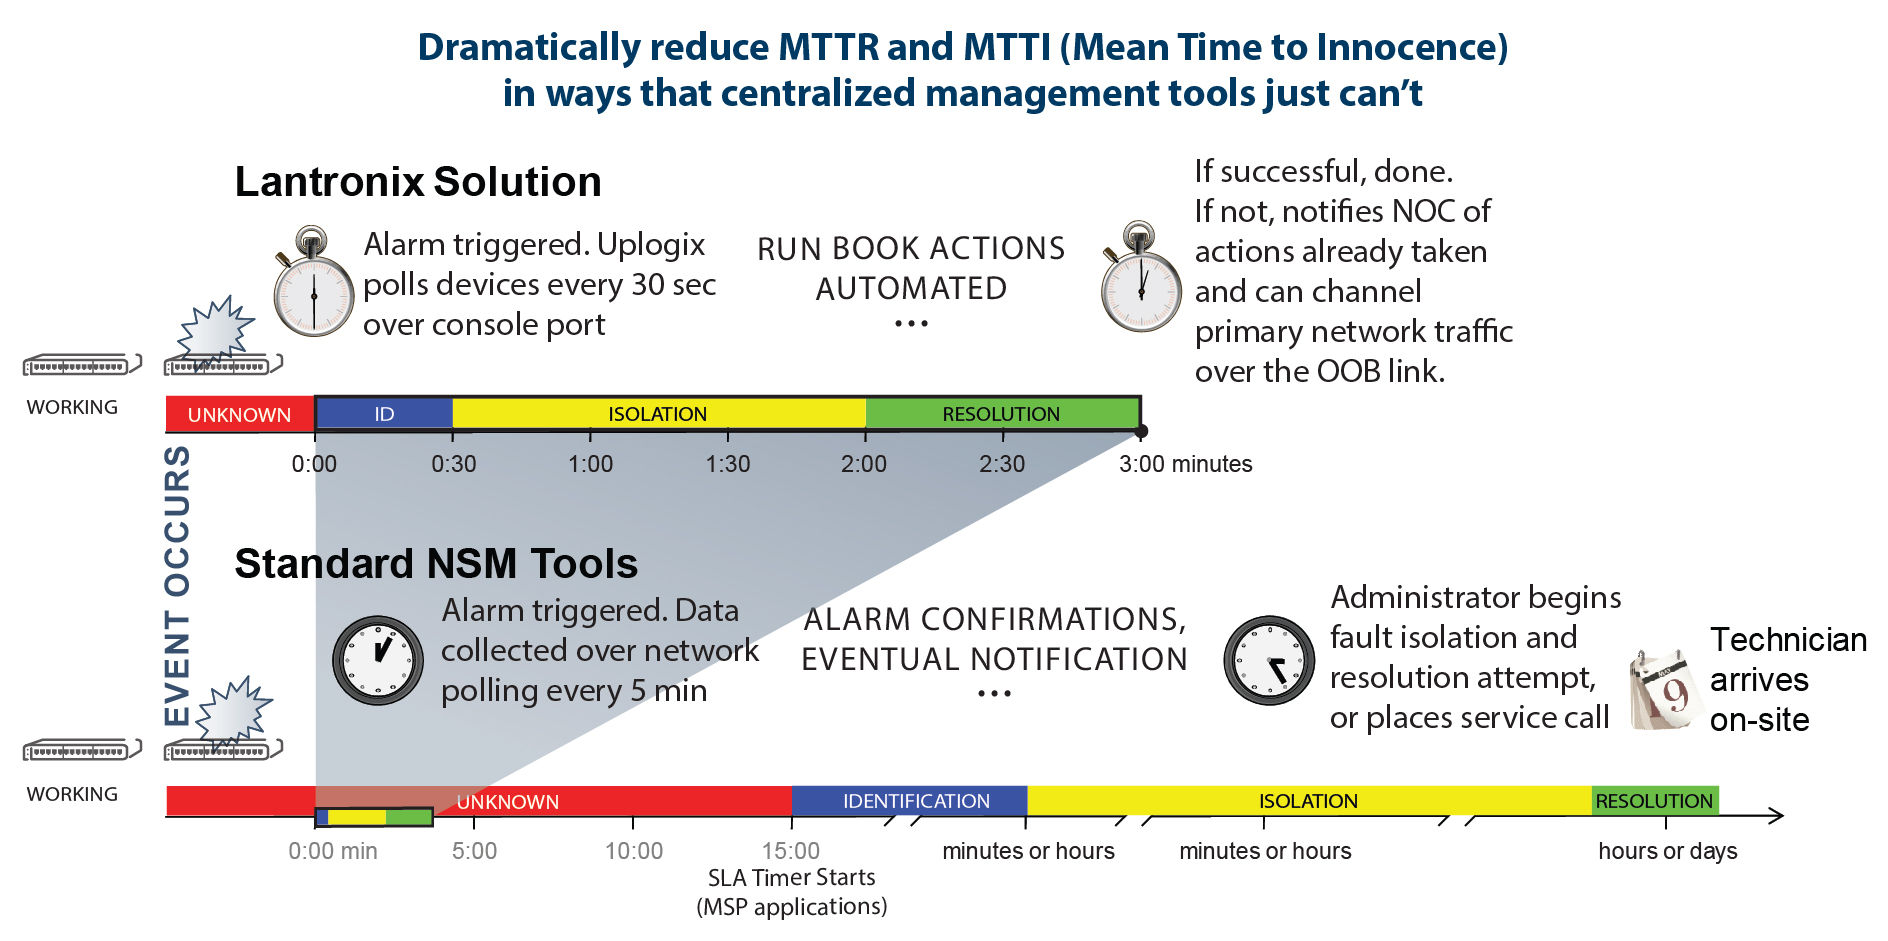 An advanced serial console server reduces MTTR and MTTI (Mean Time to Innocence)